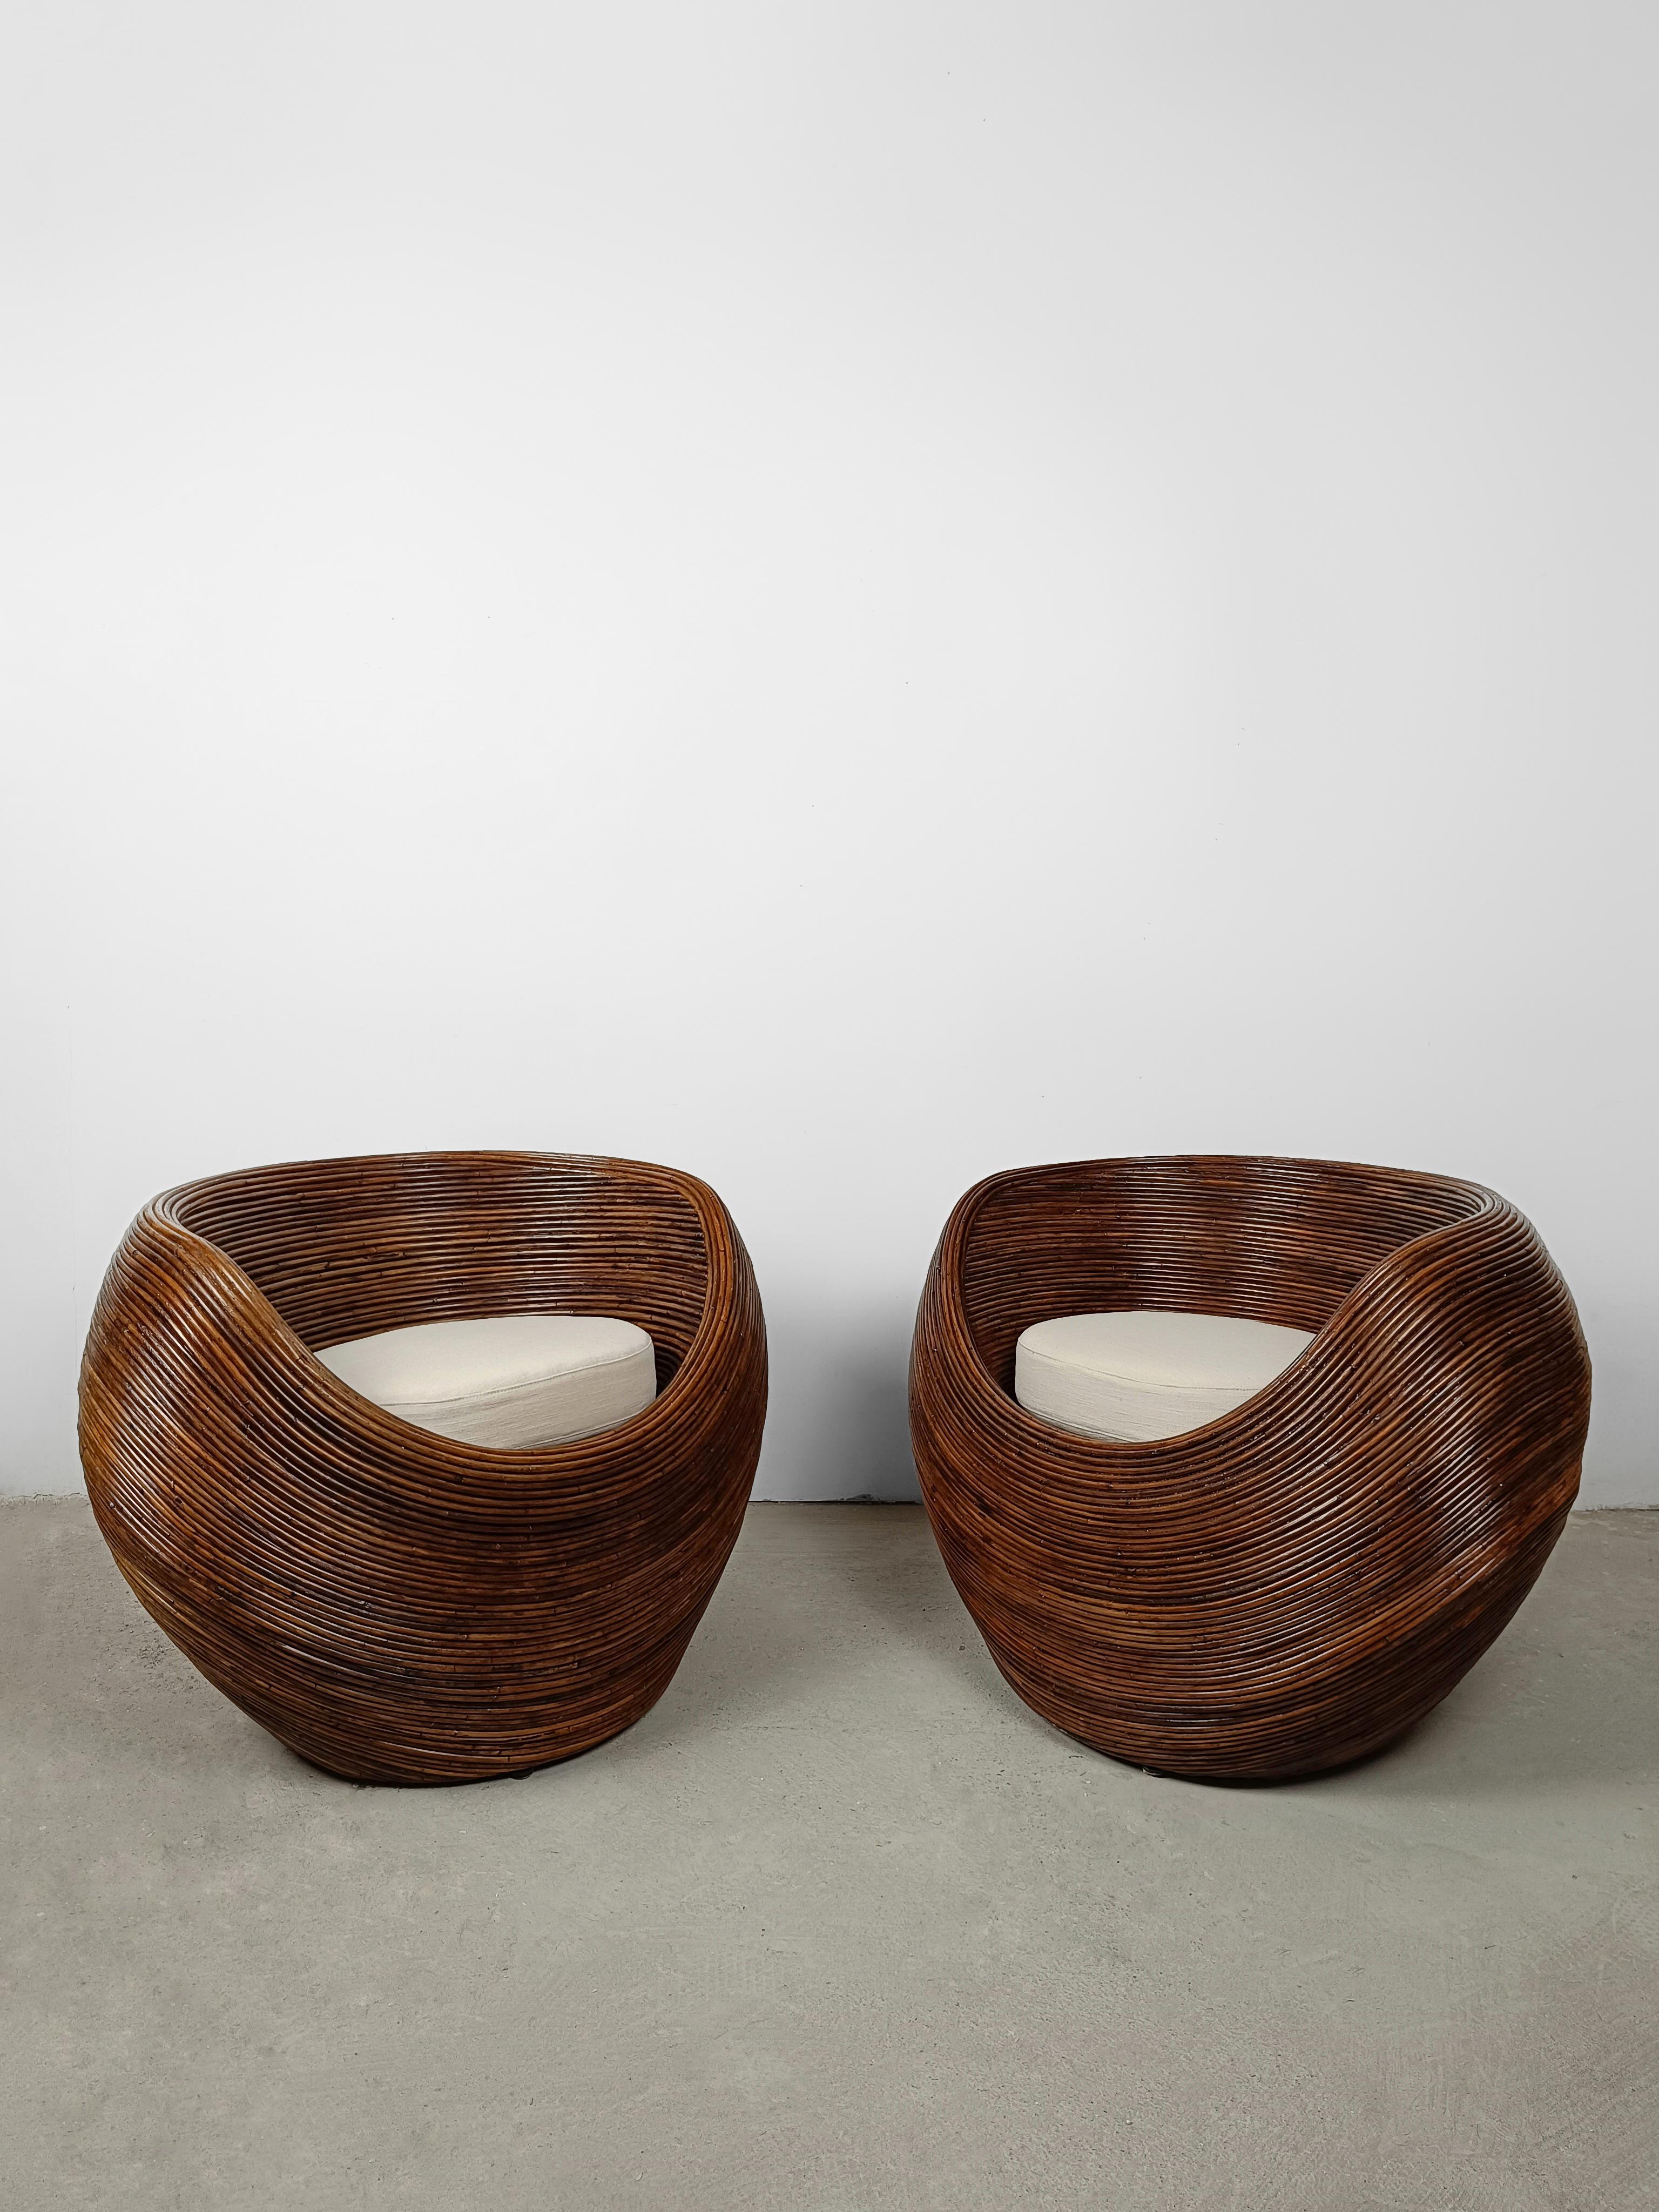 A pair of Vintage Pencil-Reed Bamboo Pod Chairs with a Coffee Table, Italy 1970s For Sale 2